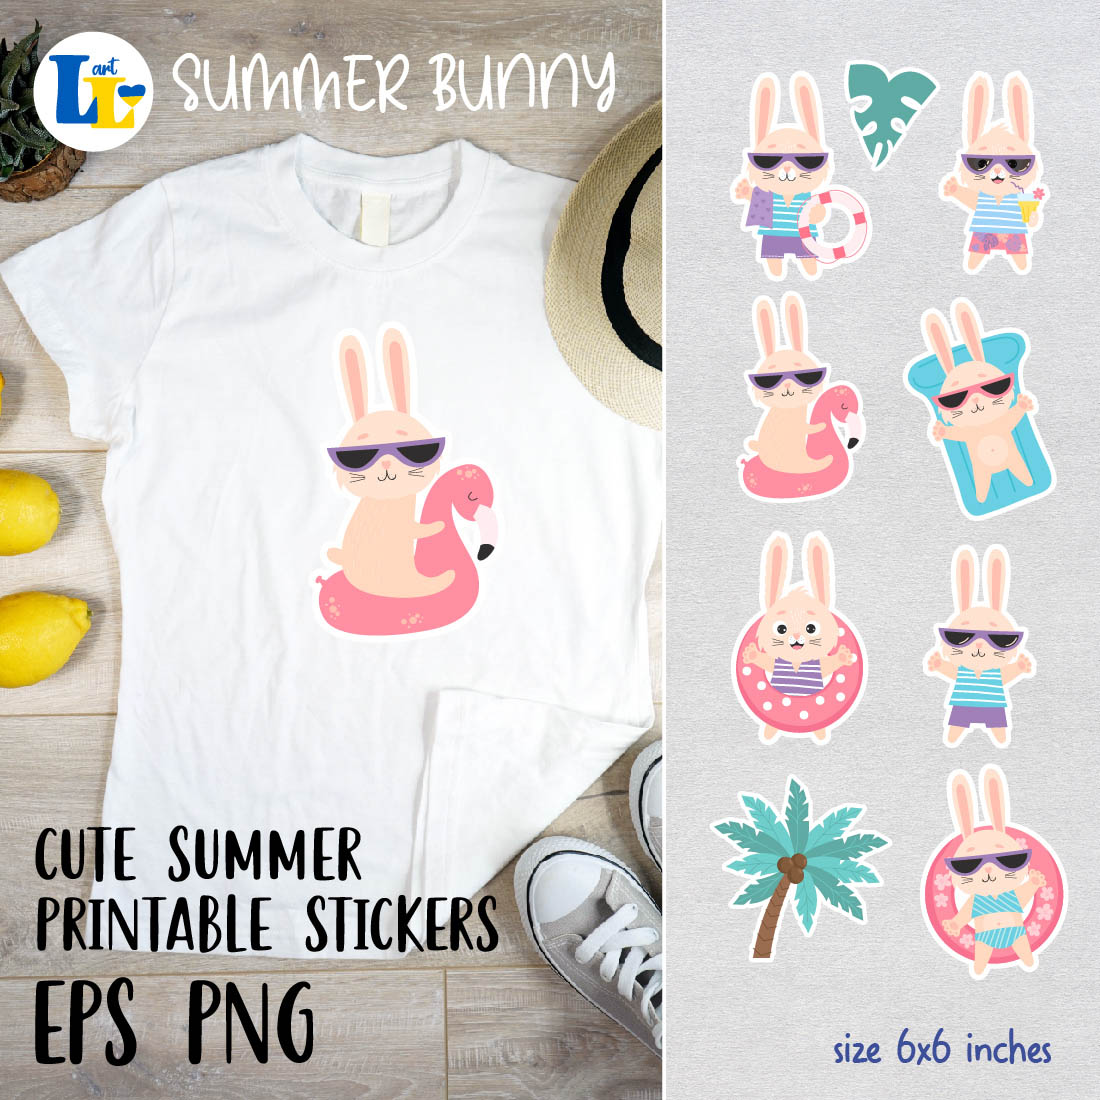 Beach Bunny And Summer Slogan Digital Summer Stickers Preview Image.